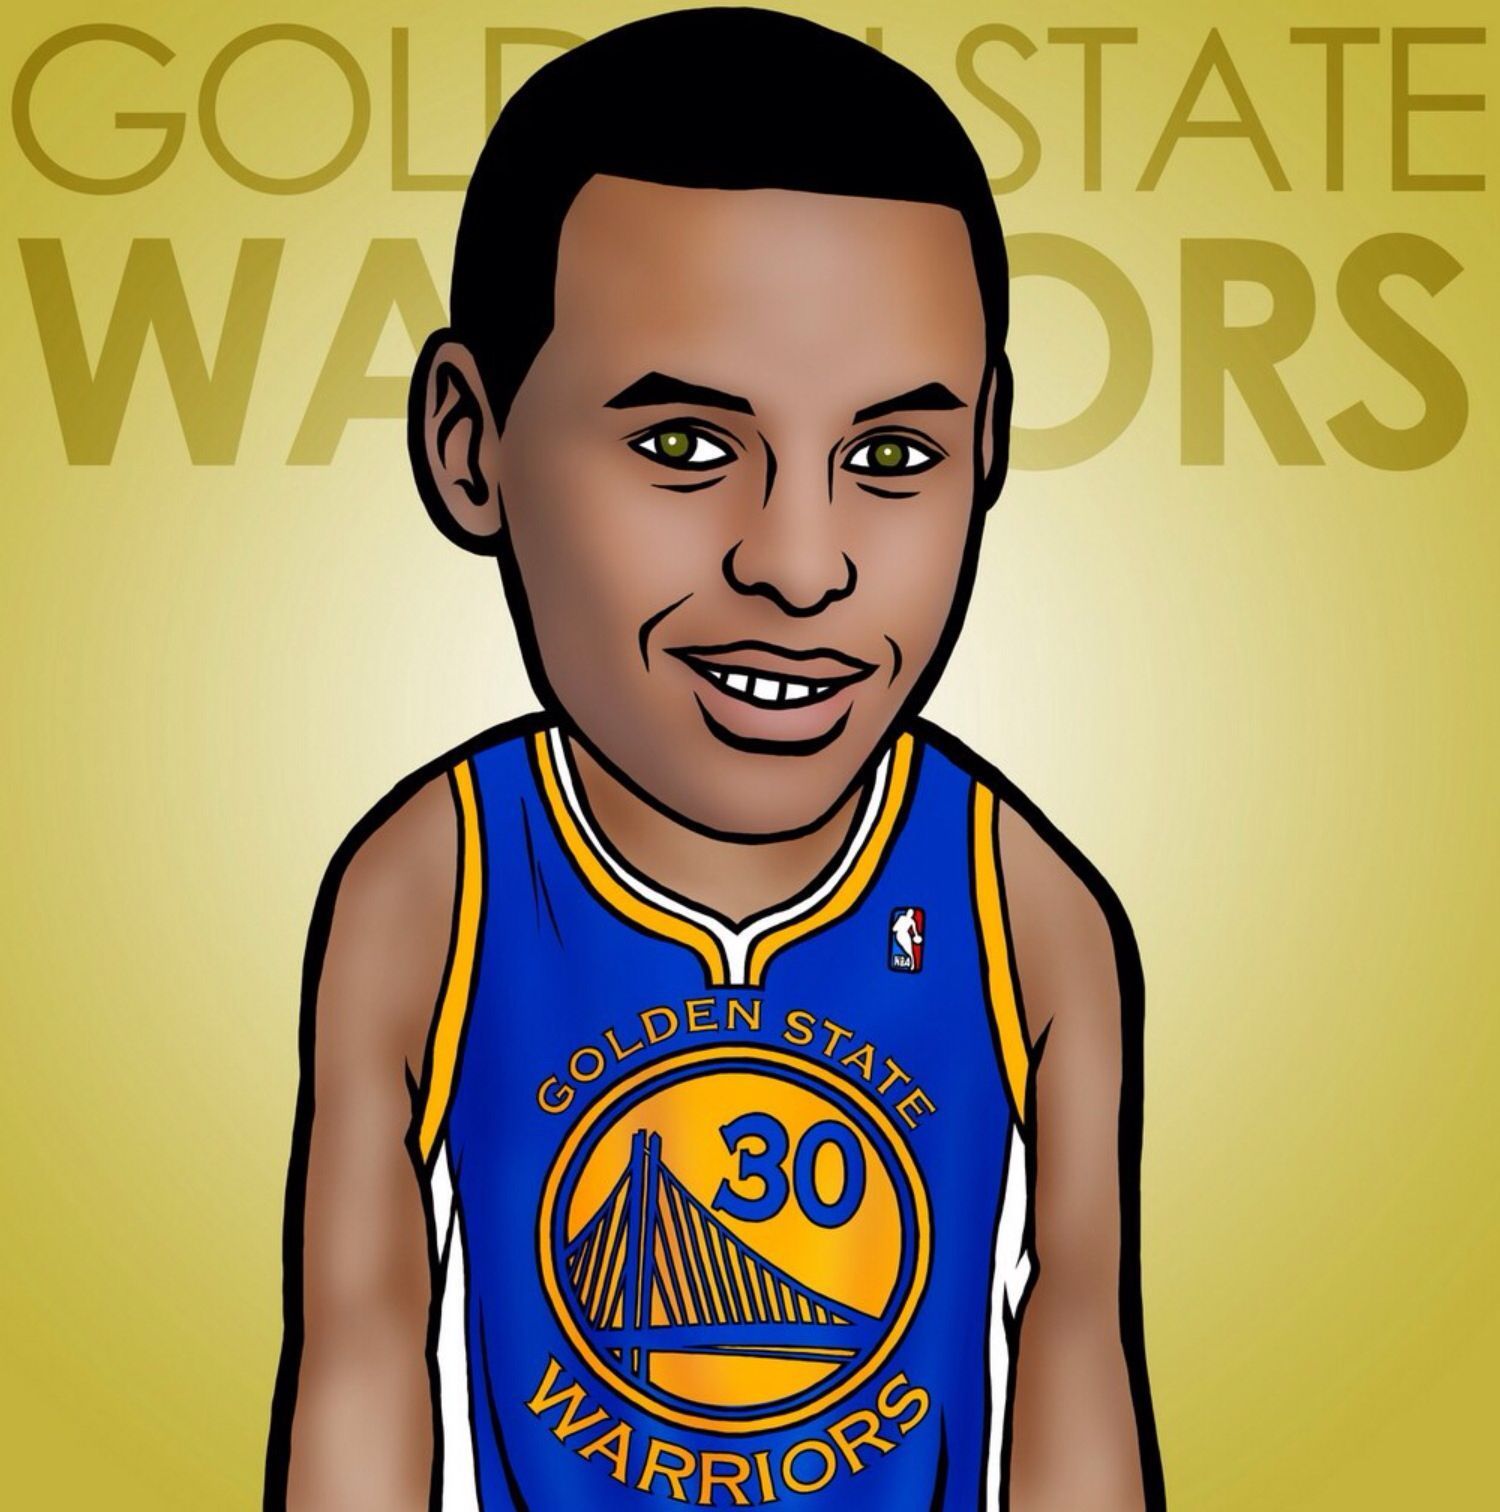 Stephen Curry Cartoon Wallpapers Wallpaper Cave.